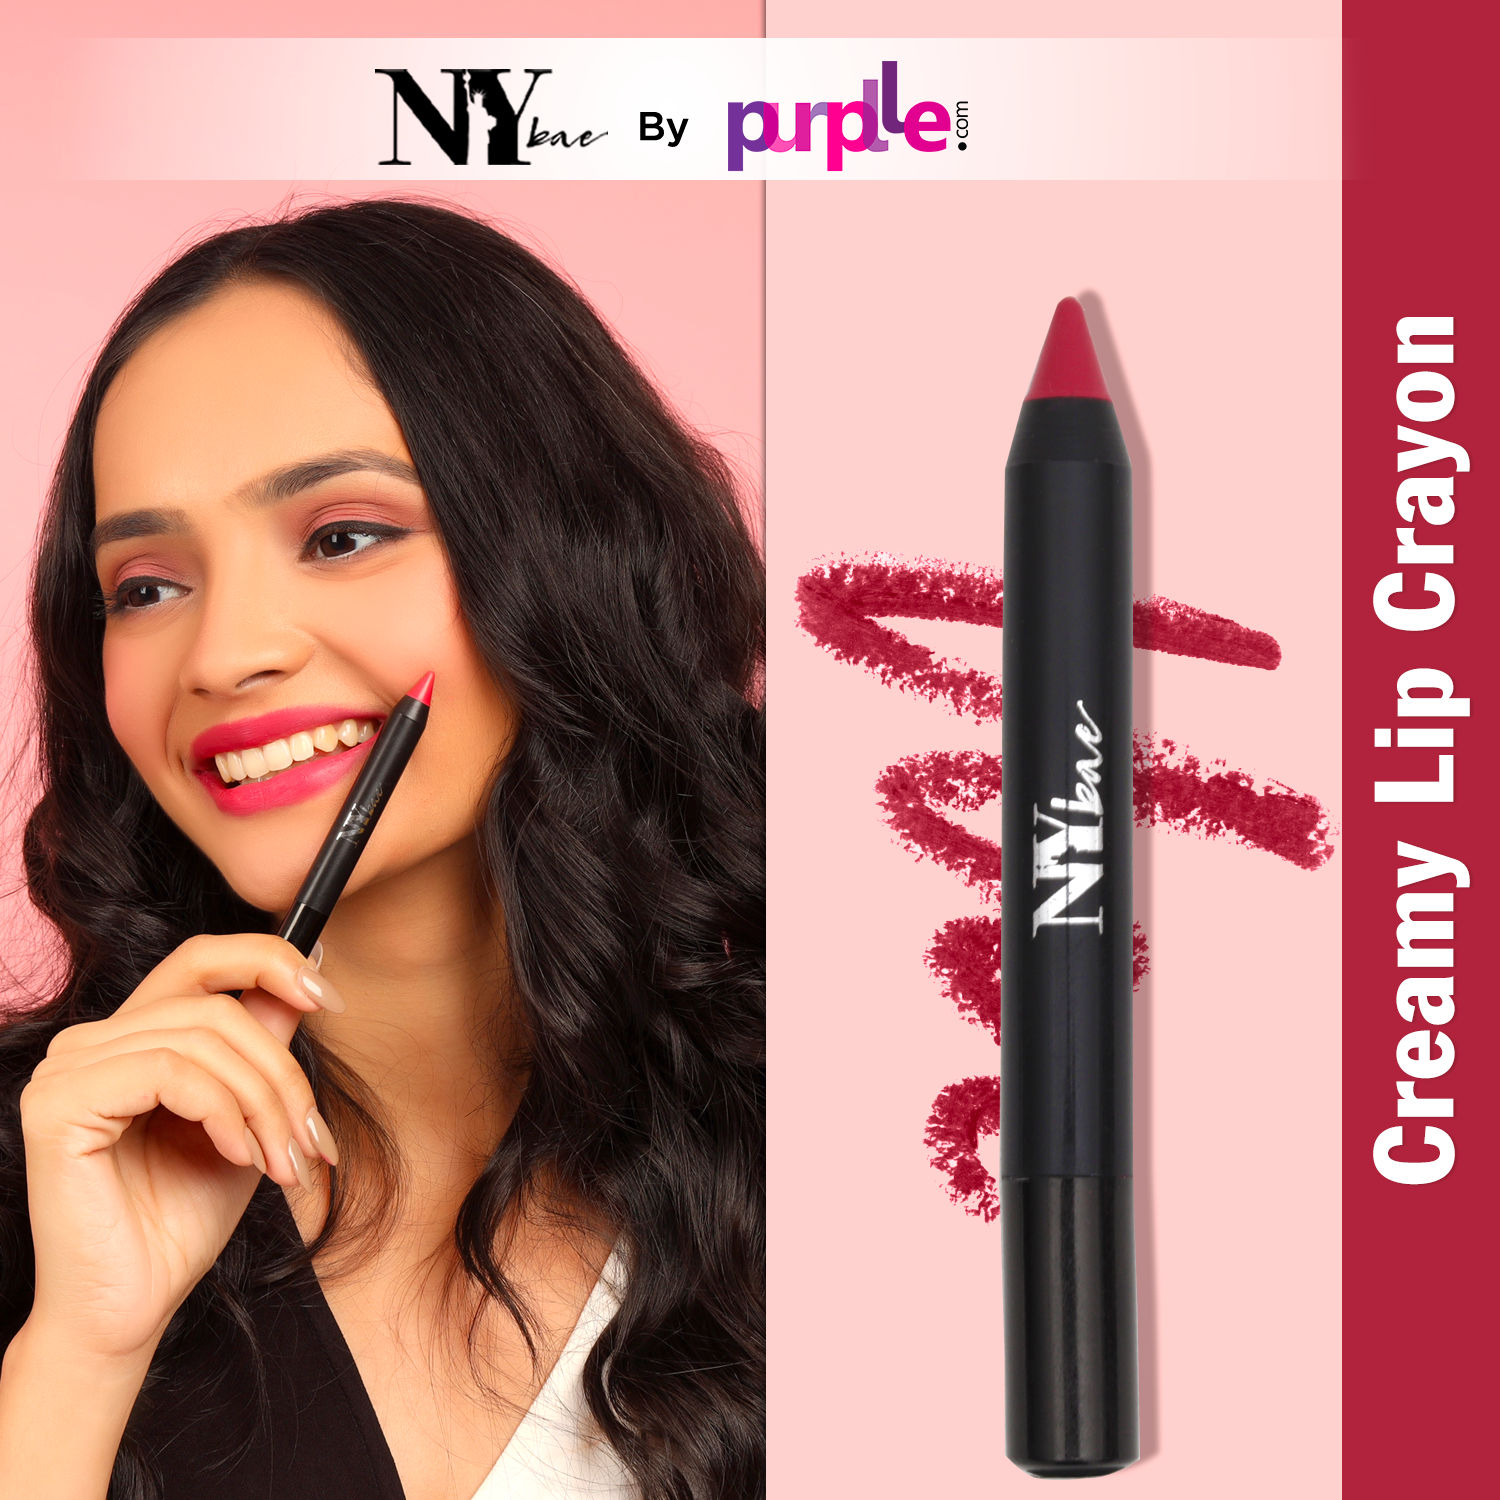 NY Bae Lip Crayon Mets Matte Pink - First Base Special 7 (2.8 g)